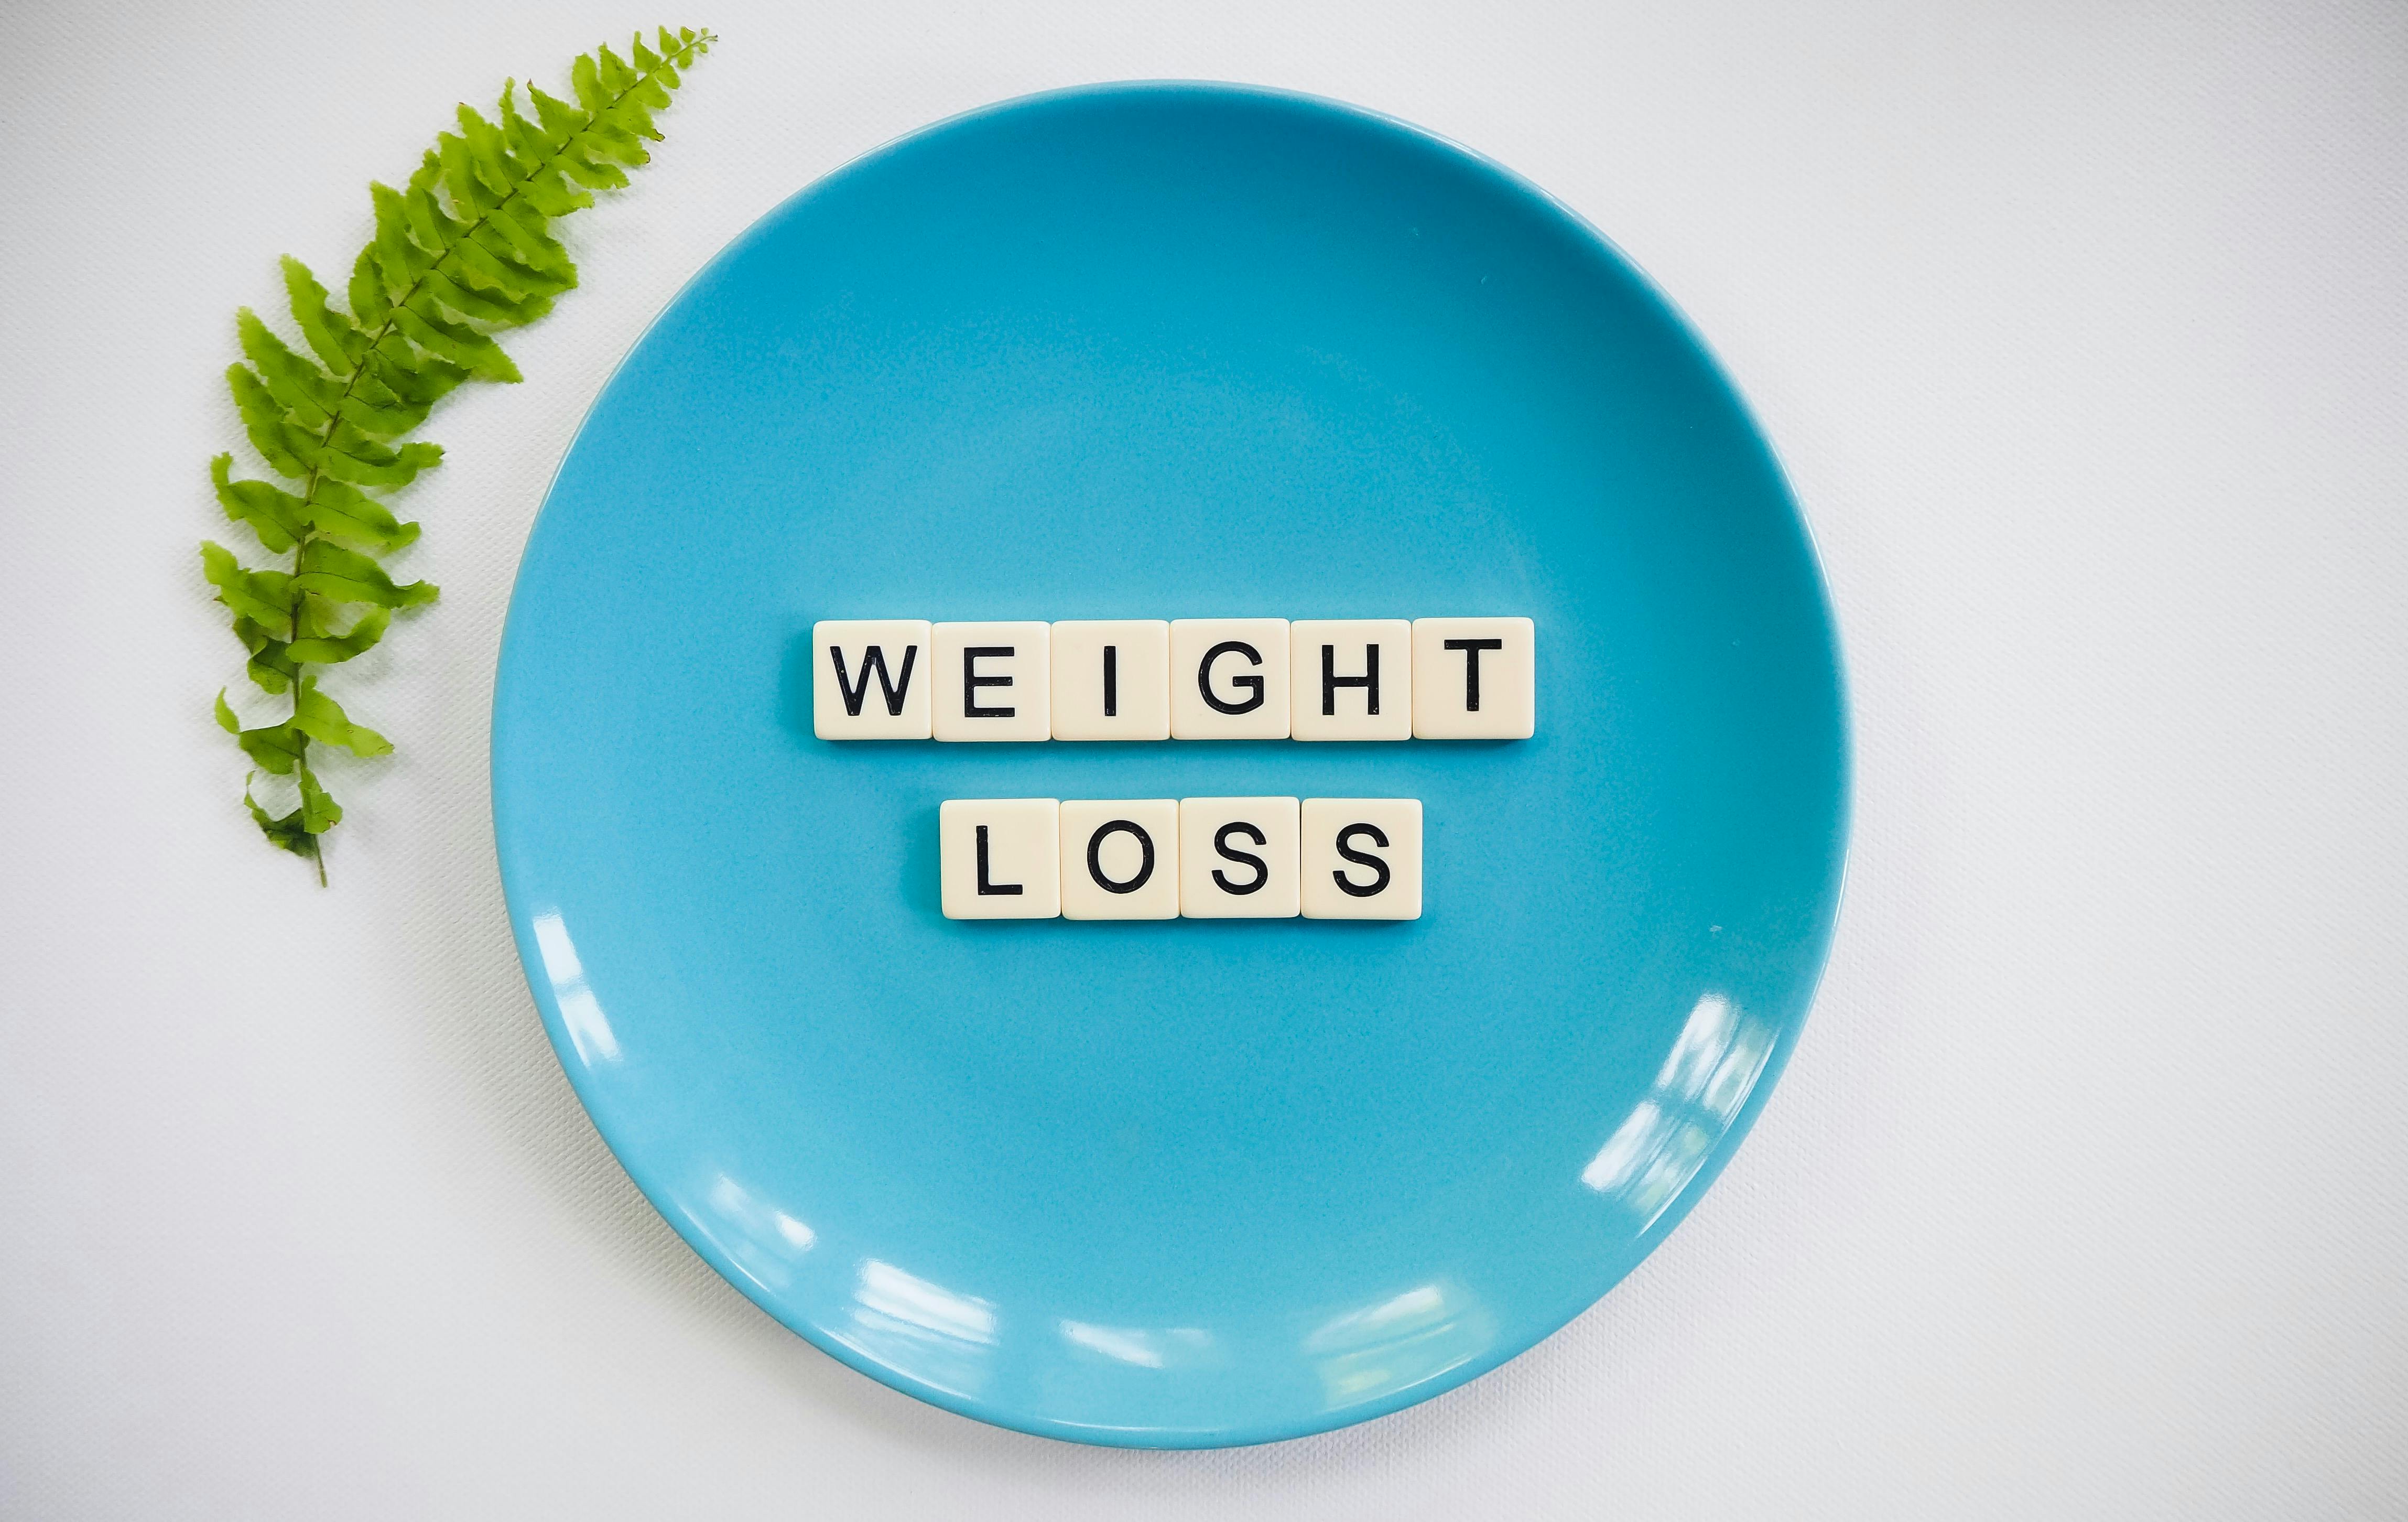 Is there an experienced weight loss consultation service in South Miami for Ozempipc?